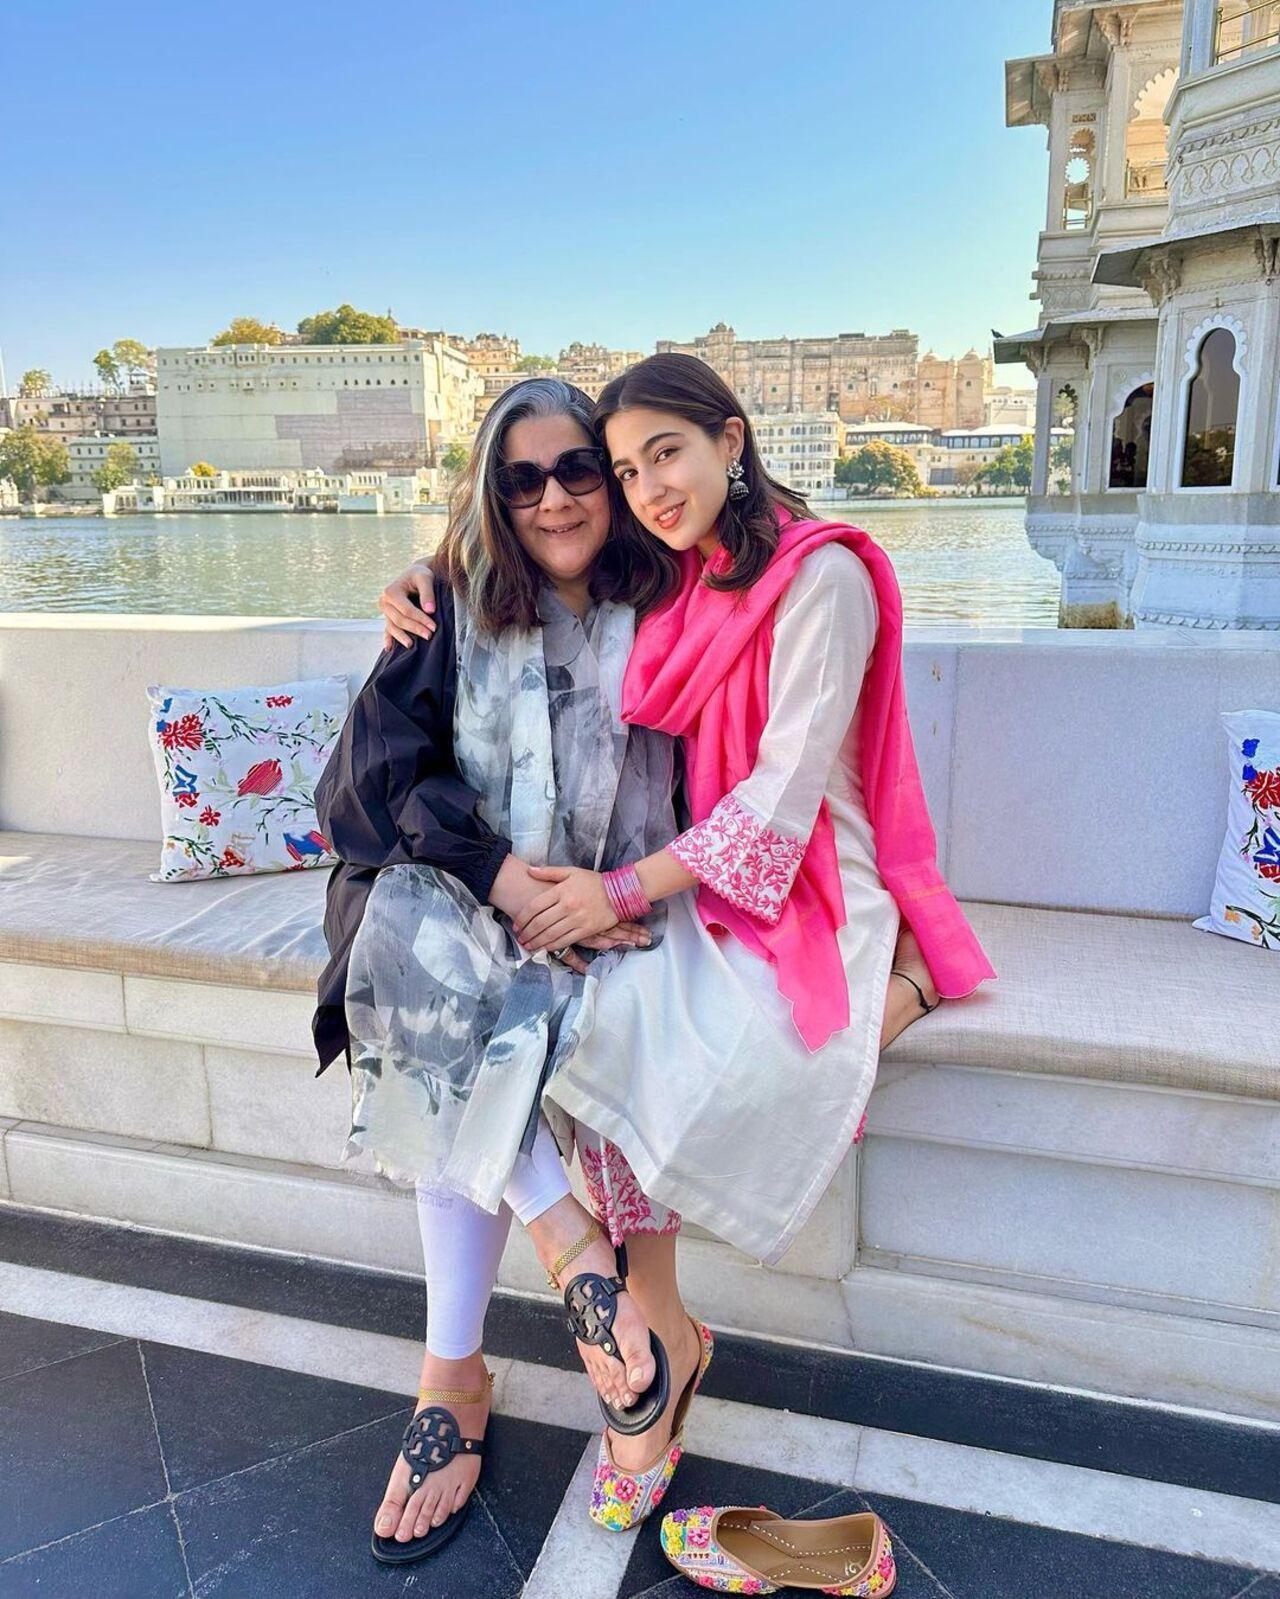 Sara and Amrita ace traditional outfits as they pose at a scenic location in Rajasthan